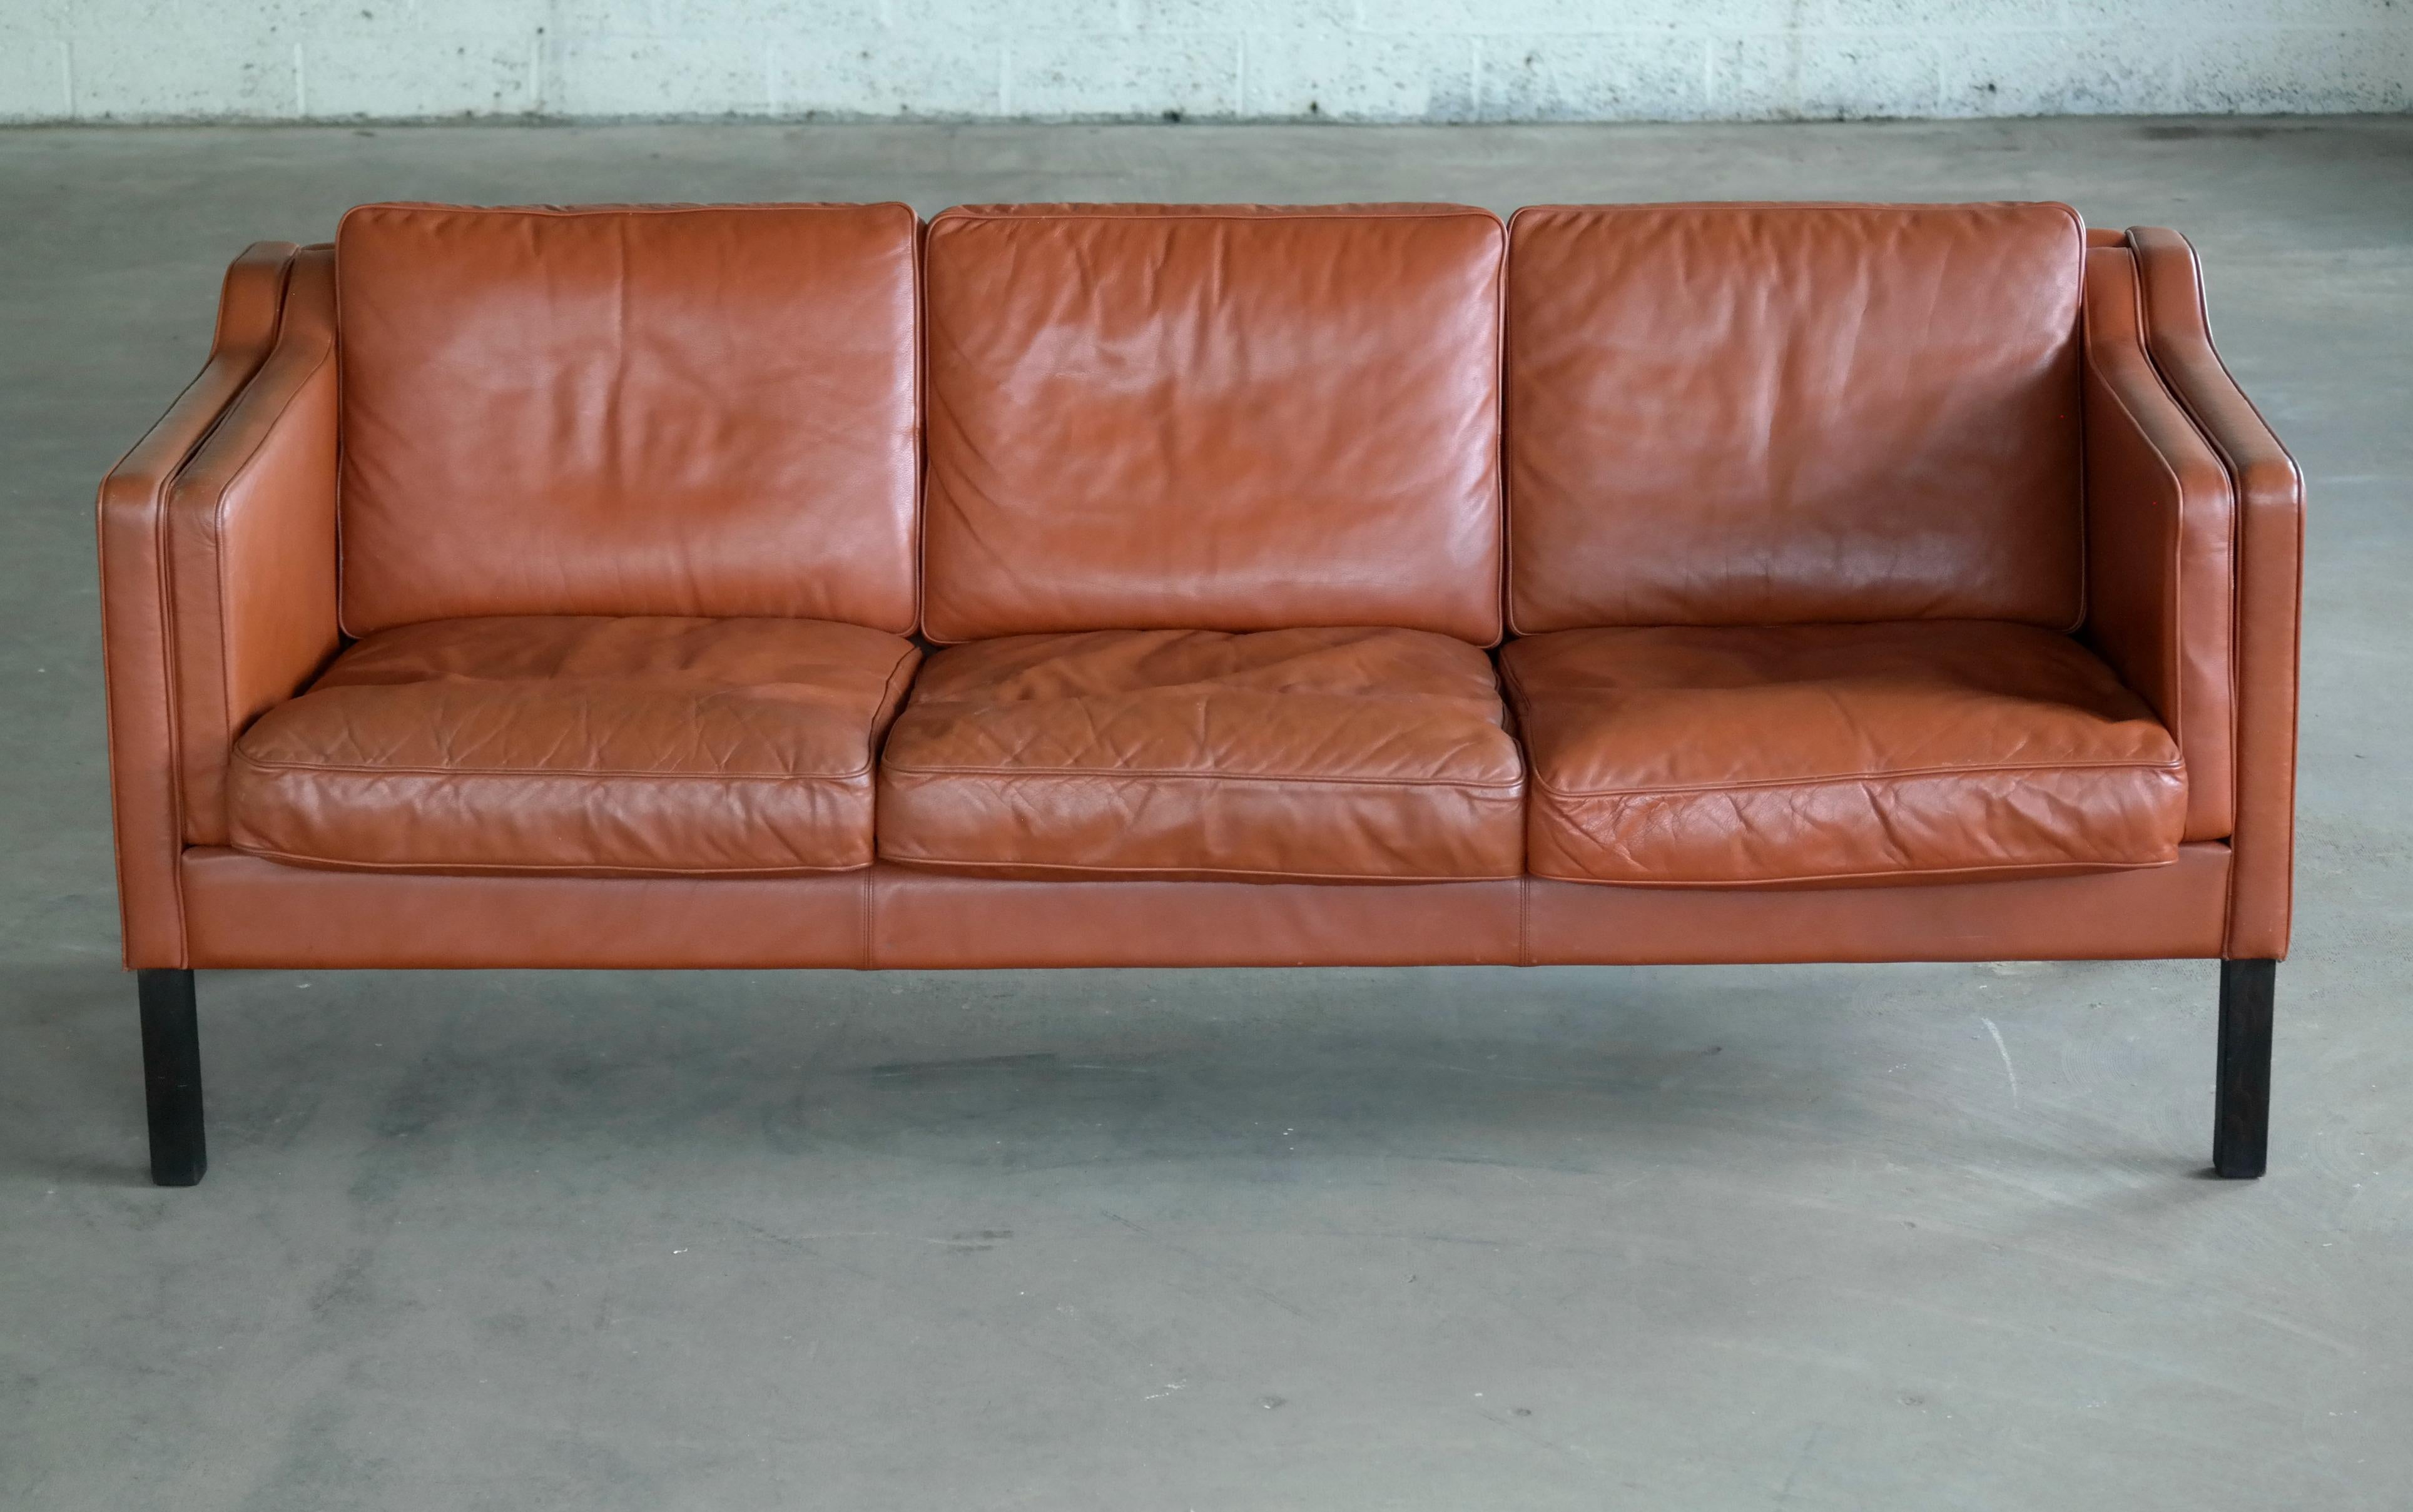 Classic three-seat sofa similar to Børge Mogensen's model 2213 in a great warm cognac tone of leather with legs in rosewood stained beech wood. One of the iconic, elegant and enduring designs coming out of Denmark in the 1960s. Originally designed